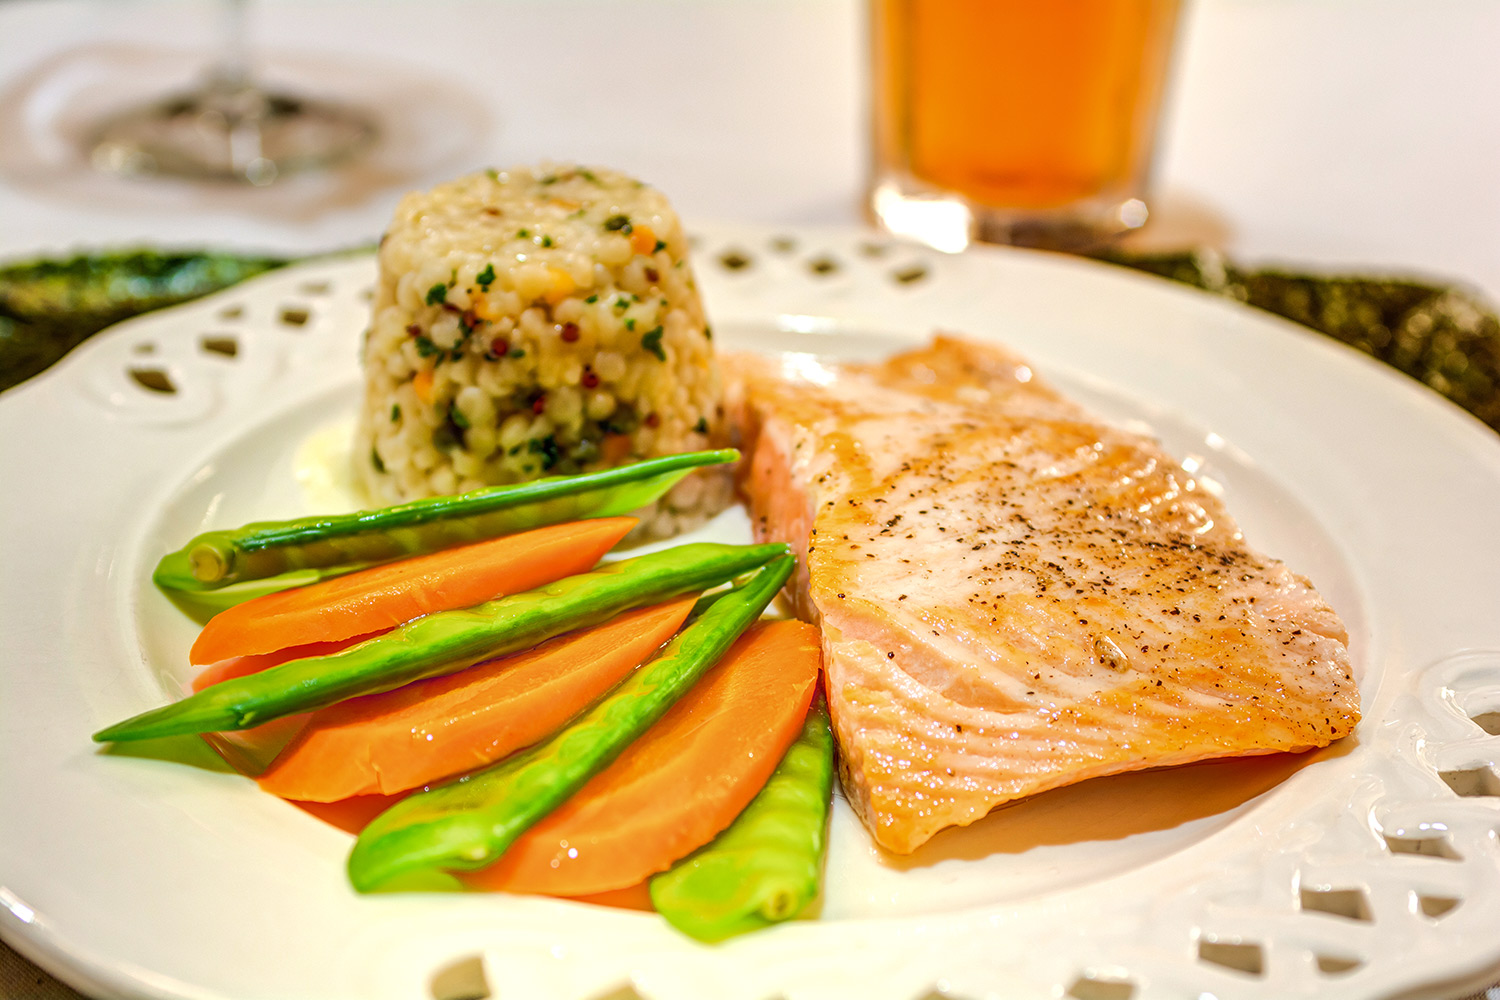 The Chateau at Gardnerville | Salmon, rice, and vegetables